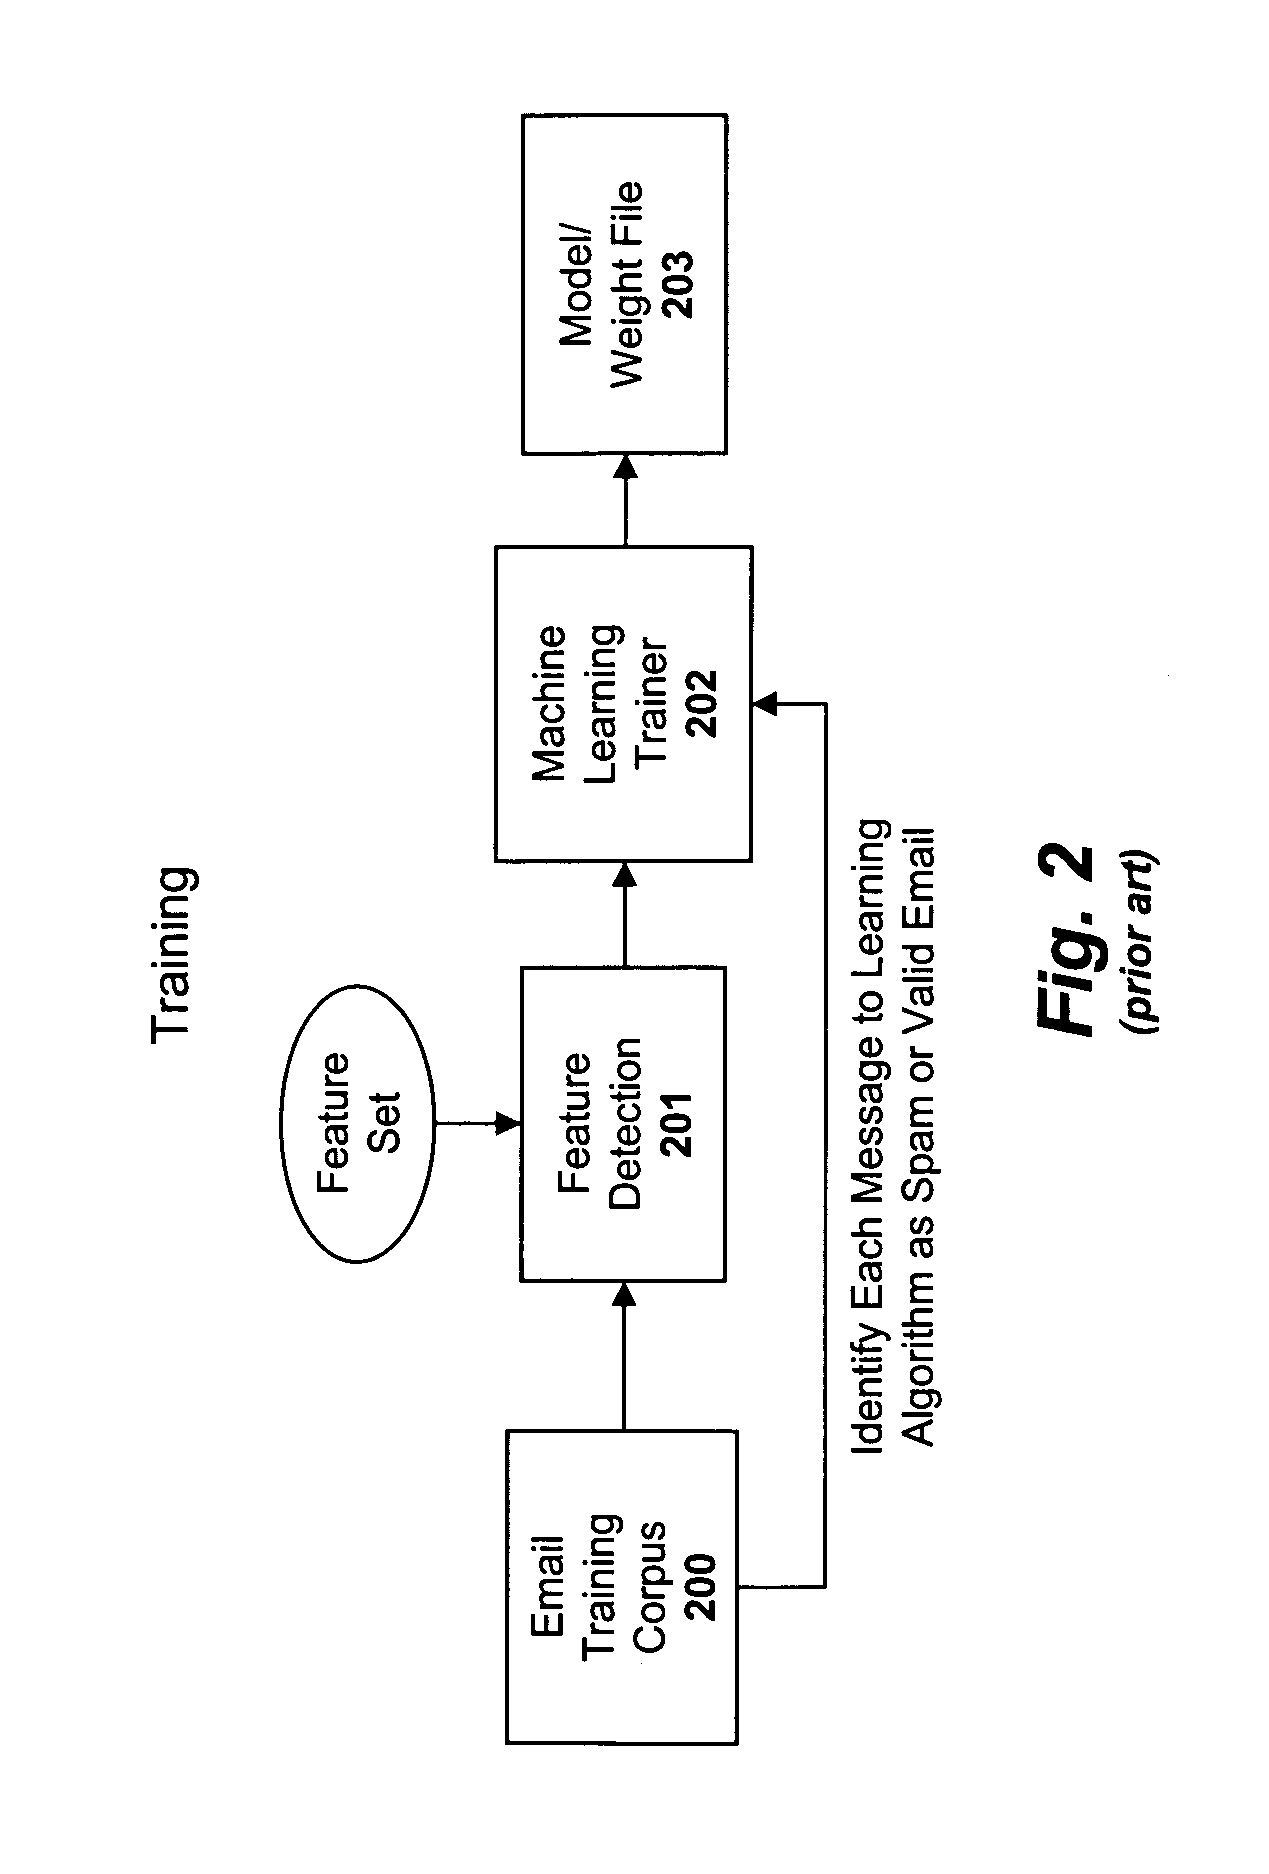 Apparatus and method for auxiliary classification for generating features for a spam filtering model